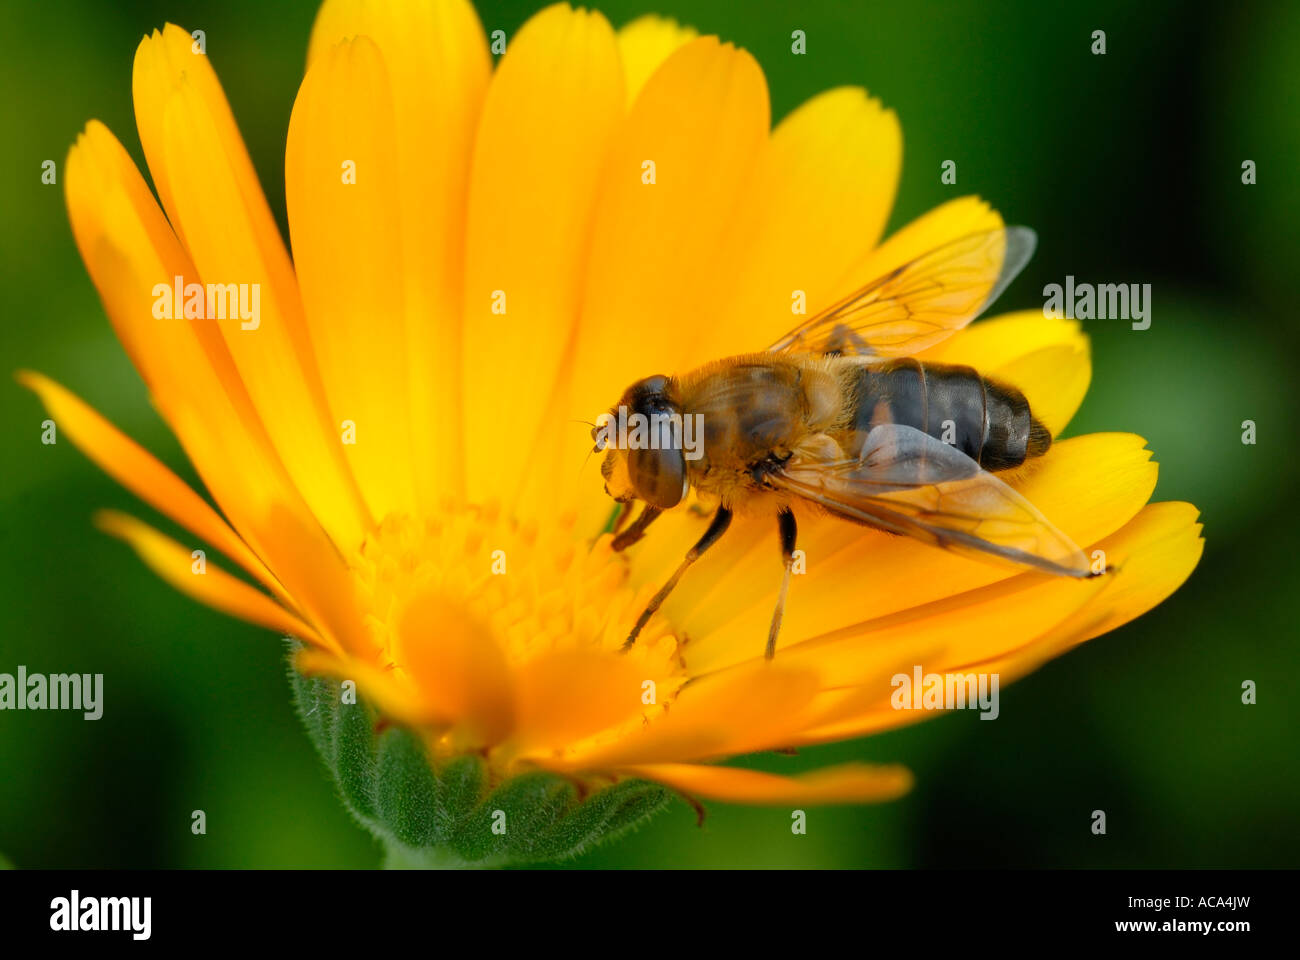 Hover fly (Eristalis tenax) sitting on a blossom Stock Photo